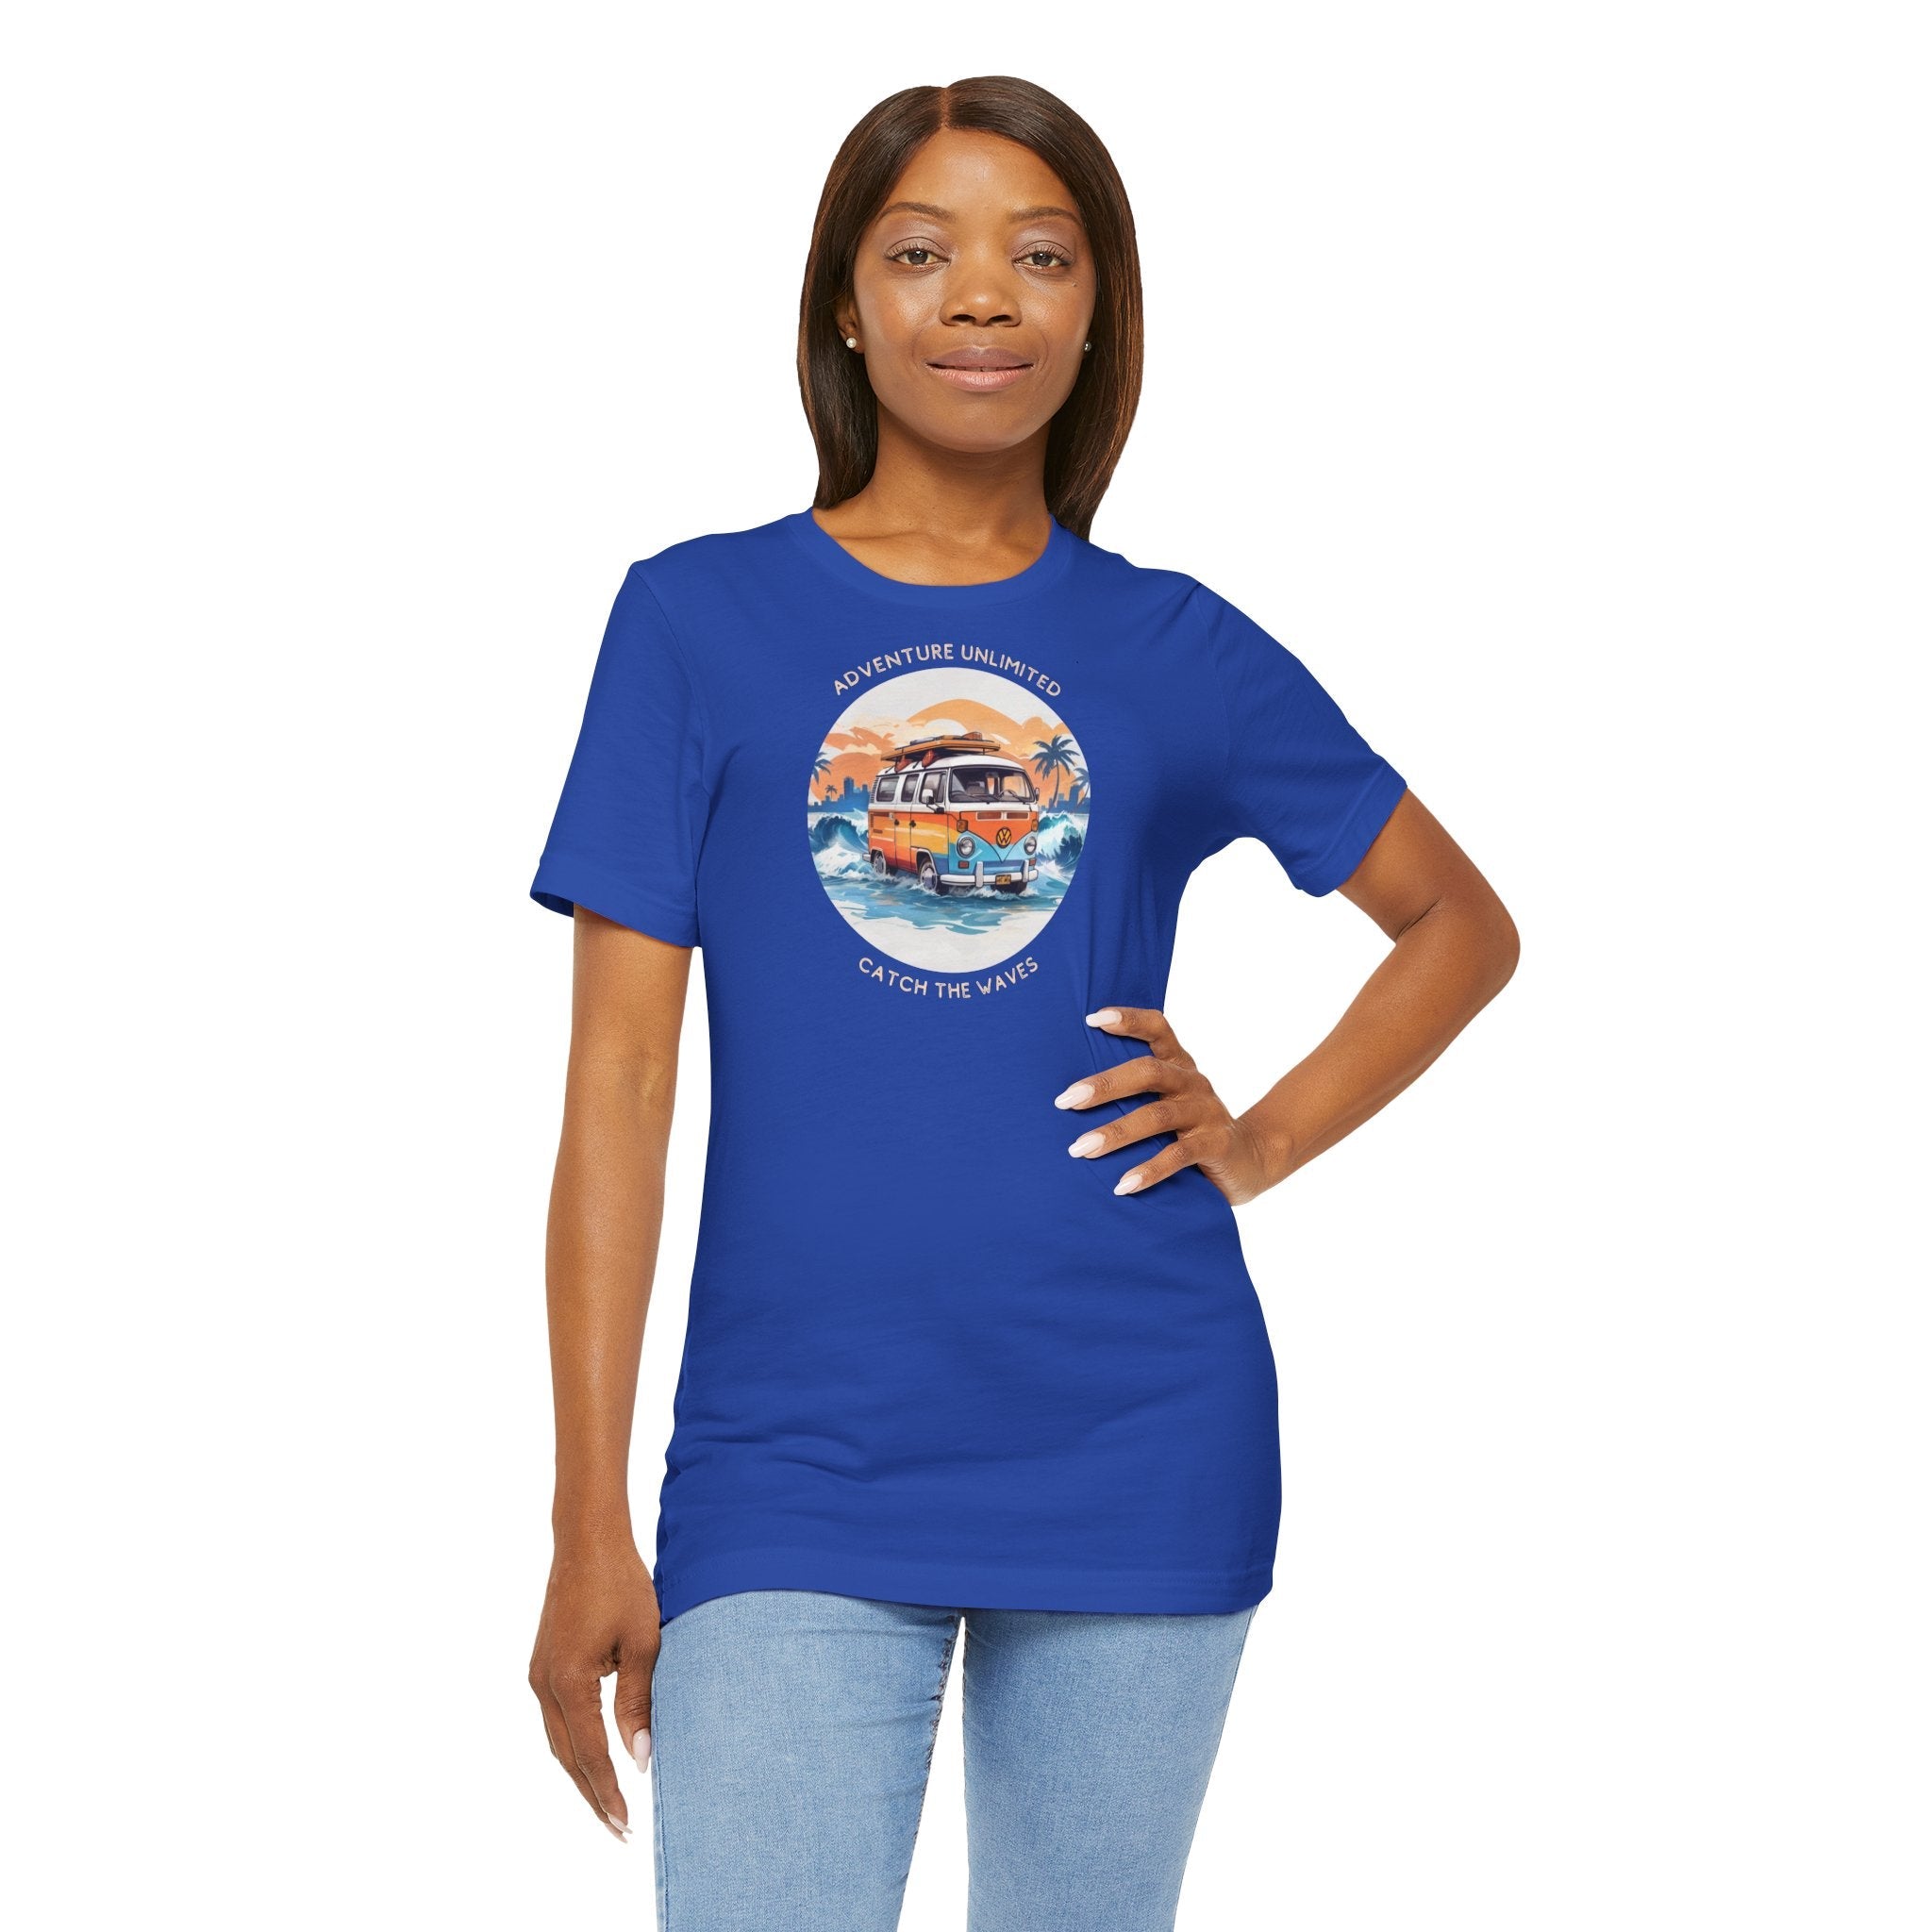 Adventure Unlimited Surfing T-Shirt by Soulshinecreators - Woman in Blue Printed T-Shirt